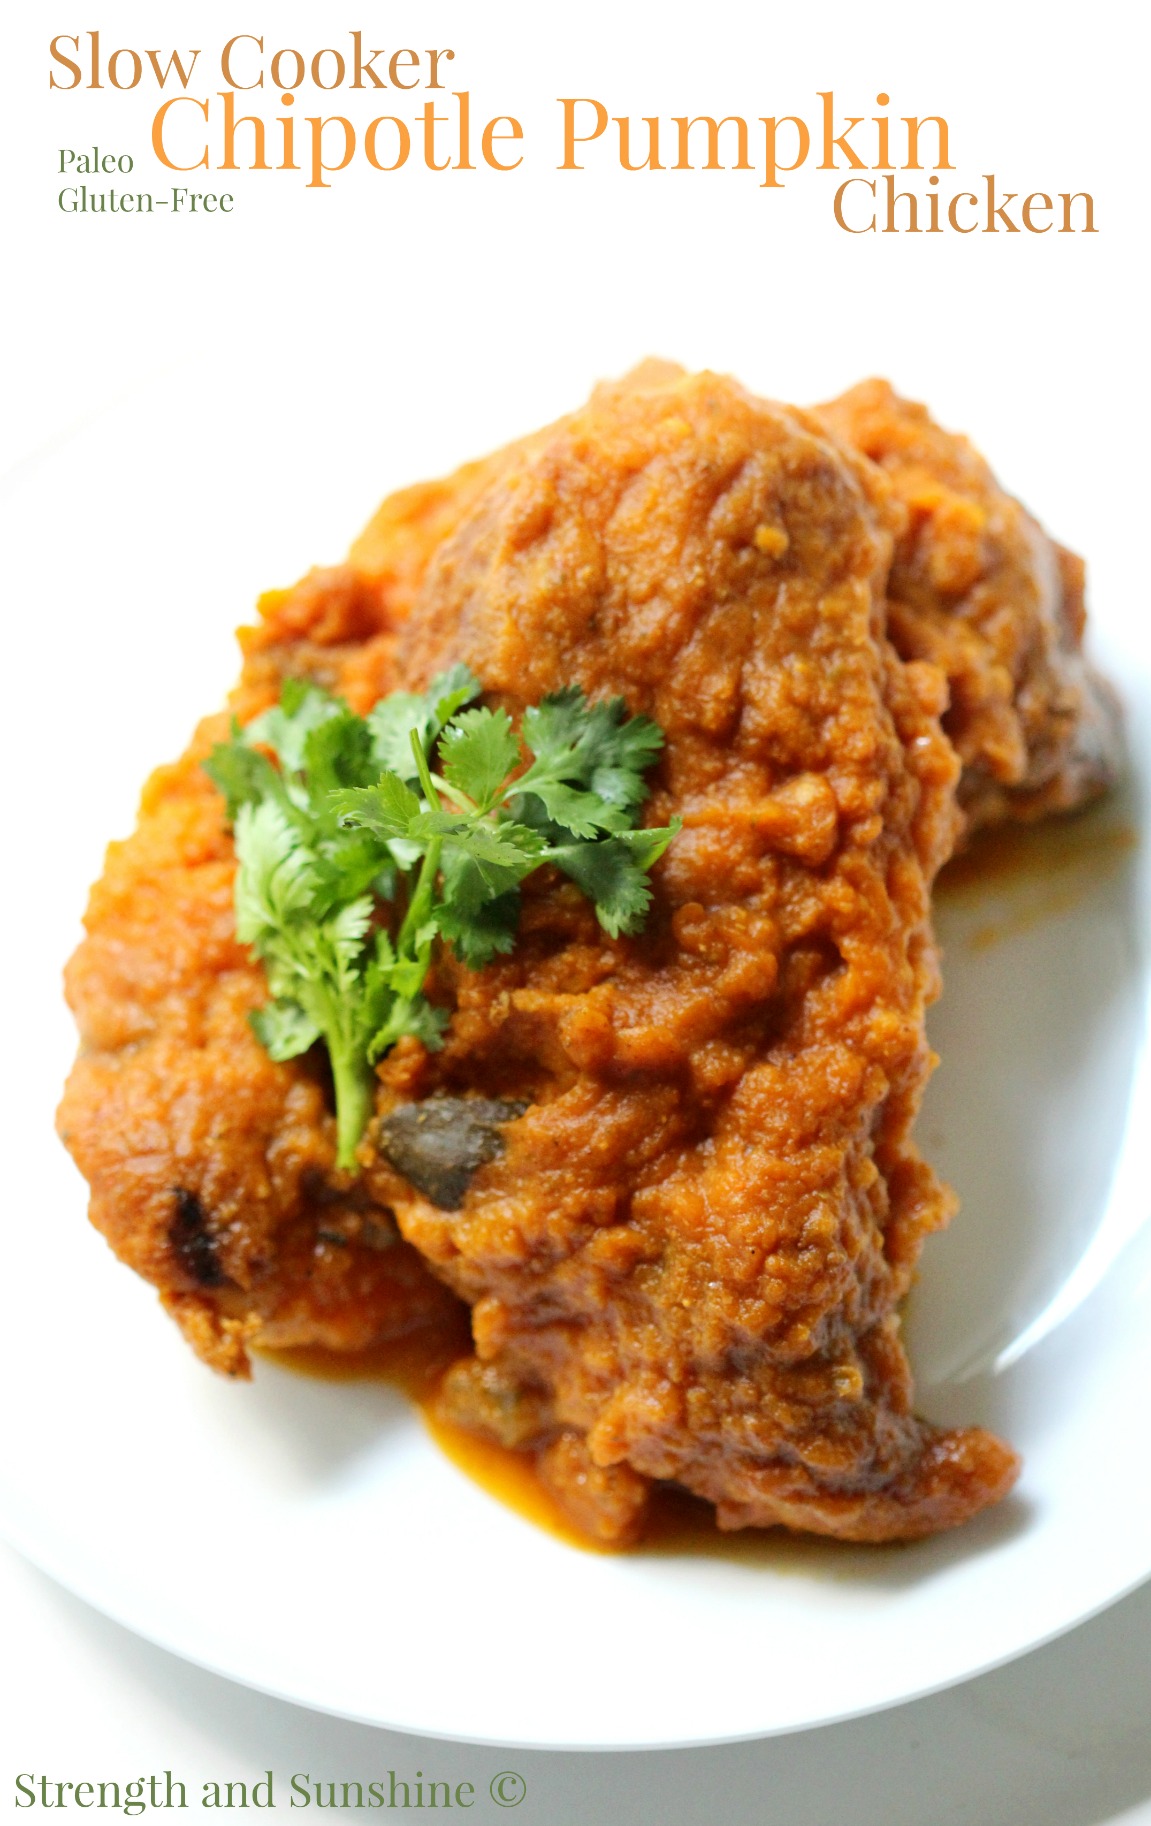 Slow Cooker Chipotle Pumpkin Chicken | Strength and Sunshine @RebeccaGF666 The season of slow cookers and pumpkins is in full swing, so combine the two for one delicious healthy dinner! Slow Cooker Chipotle Pumpkin Chicken is a creamy spicy new way to have a great gluten-free and paleo dinner with minimal effort and all the flavor!